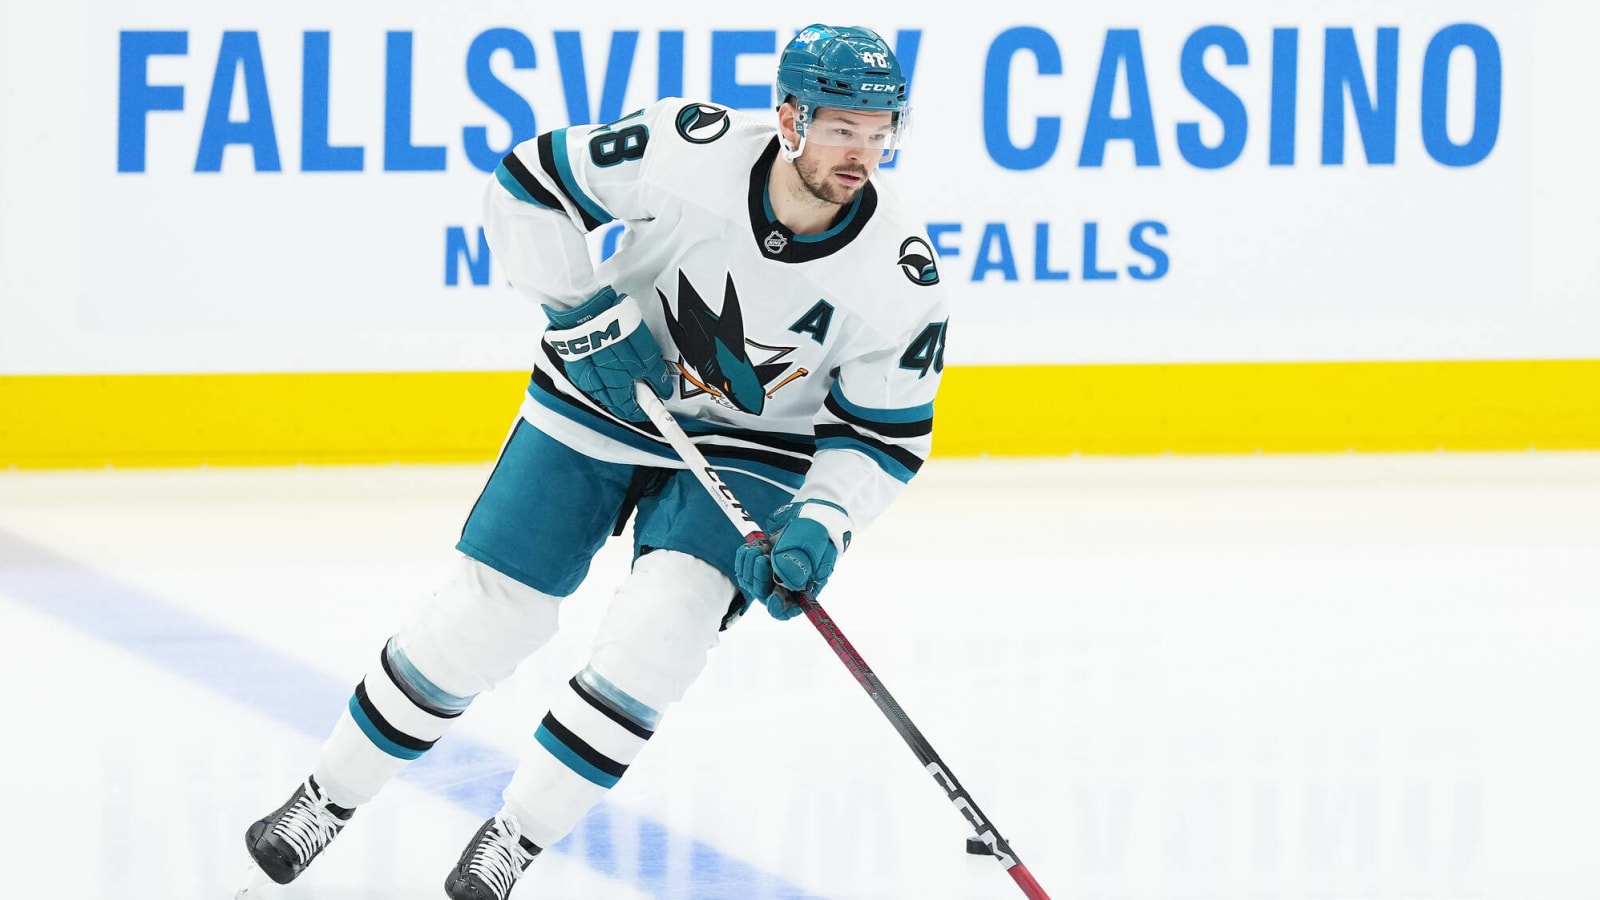 Golden Knights Go All In and Trade for Tomas Hertl at Deadline